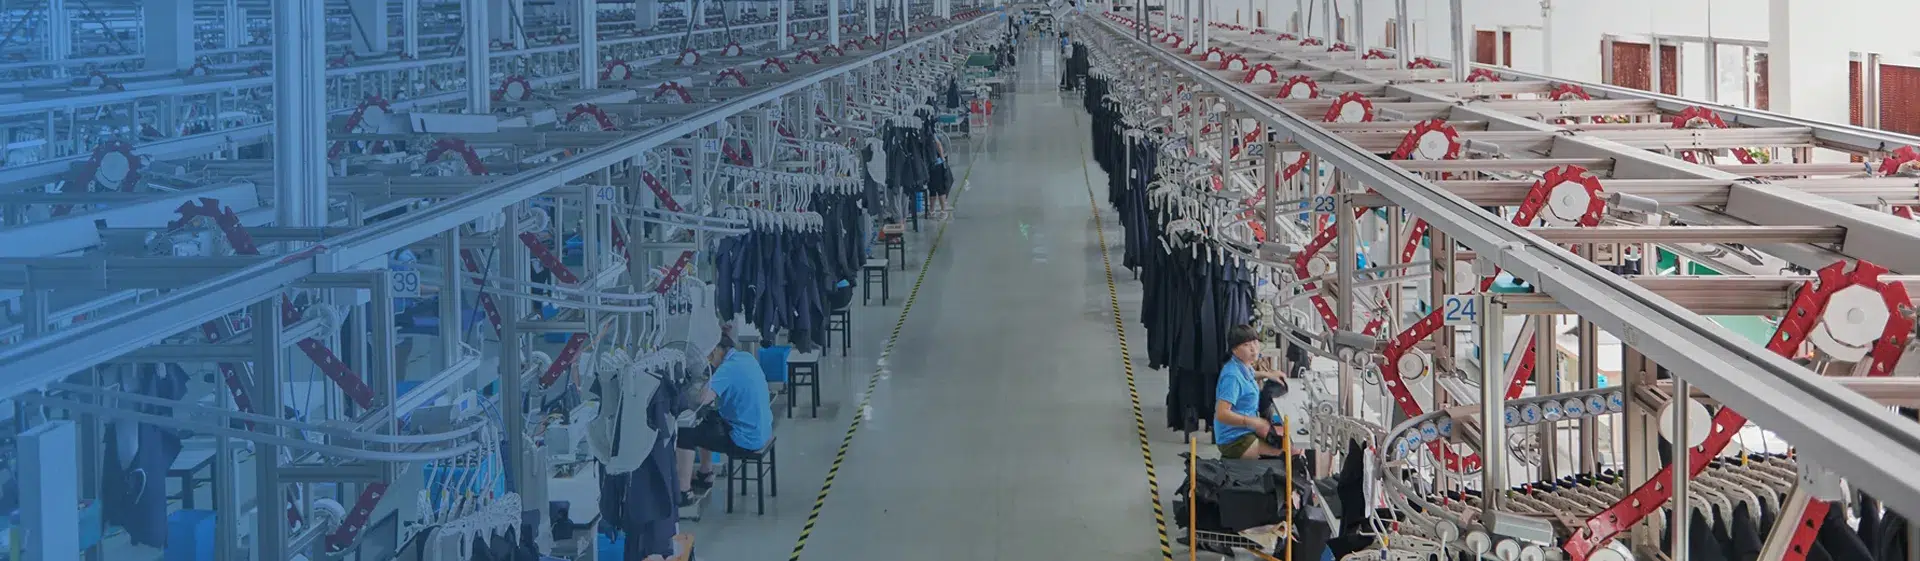 sustainable clothing manufacturers